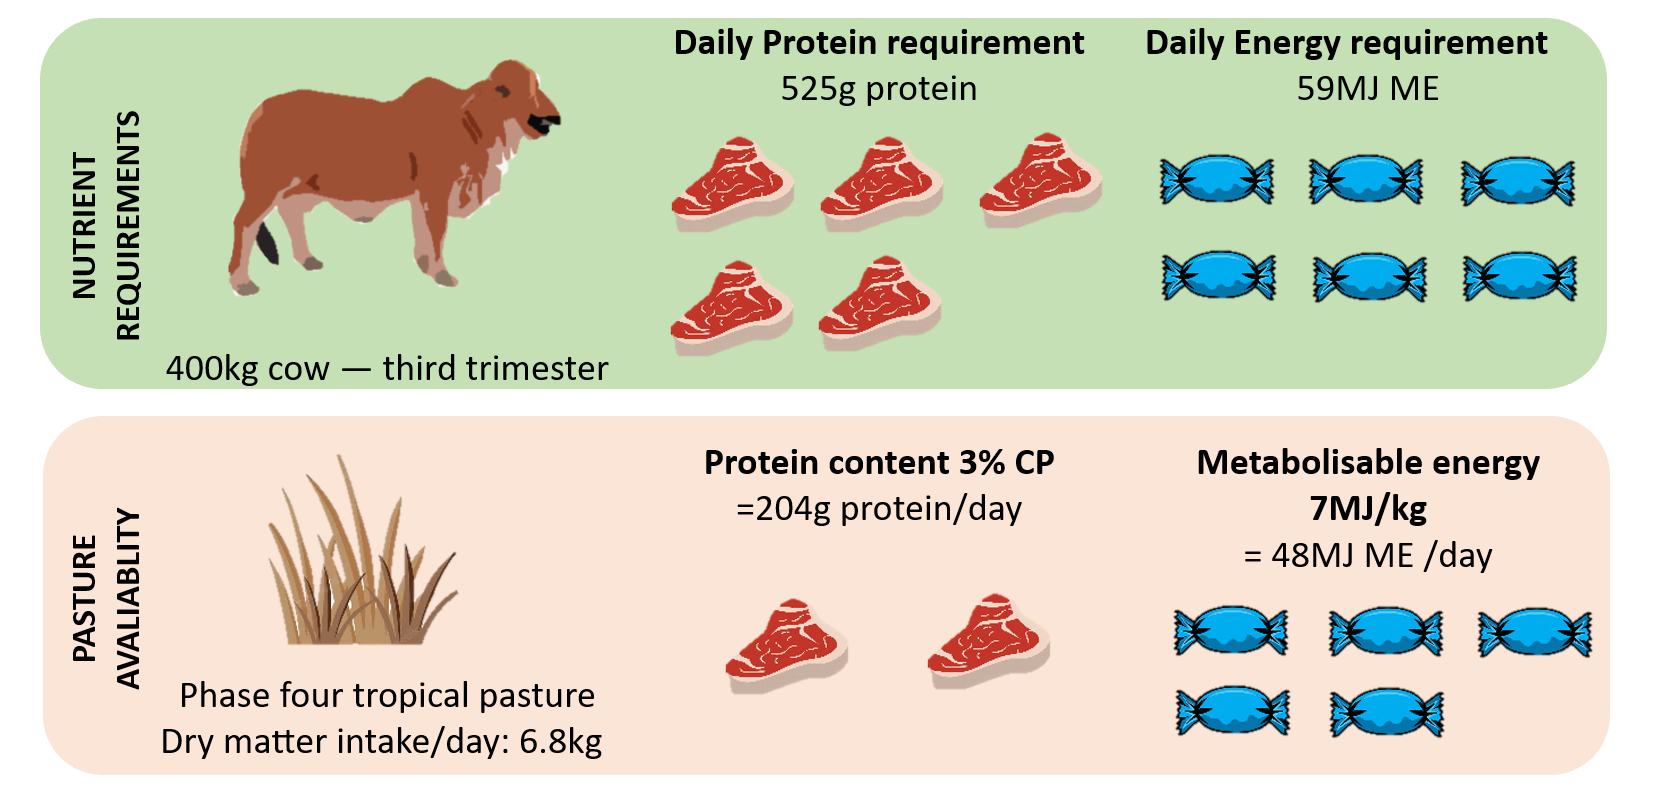 The double whammy: Not only is pasture in phase 4 of growth low in protein and energy, but it's also hard for cattle to digest, so their intake decreases as well. As a result, mature cattle will drop condition or stop cycling, making it near impossible to get back in calf without nutritional intervention in the form of supplementation.